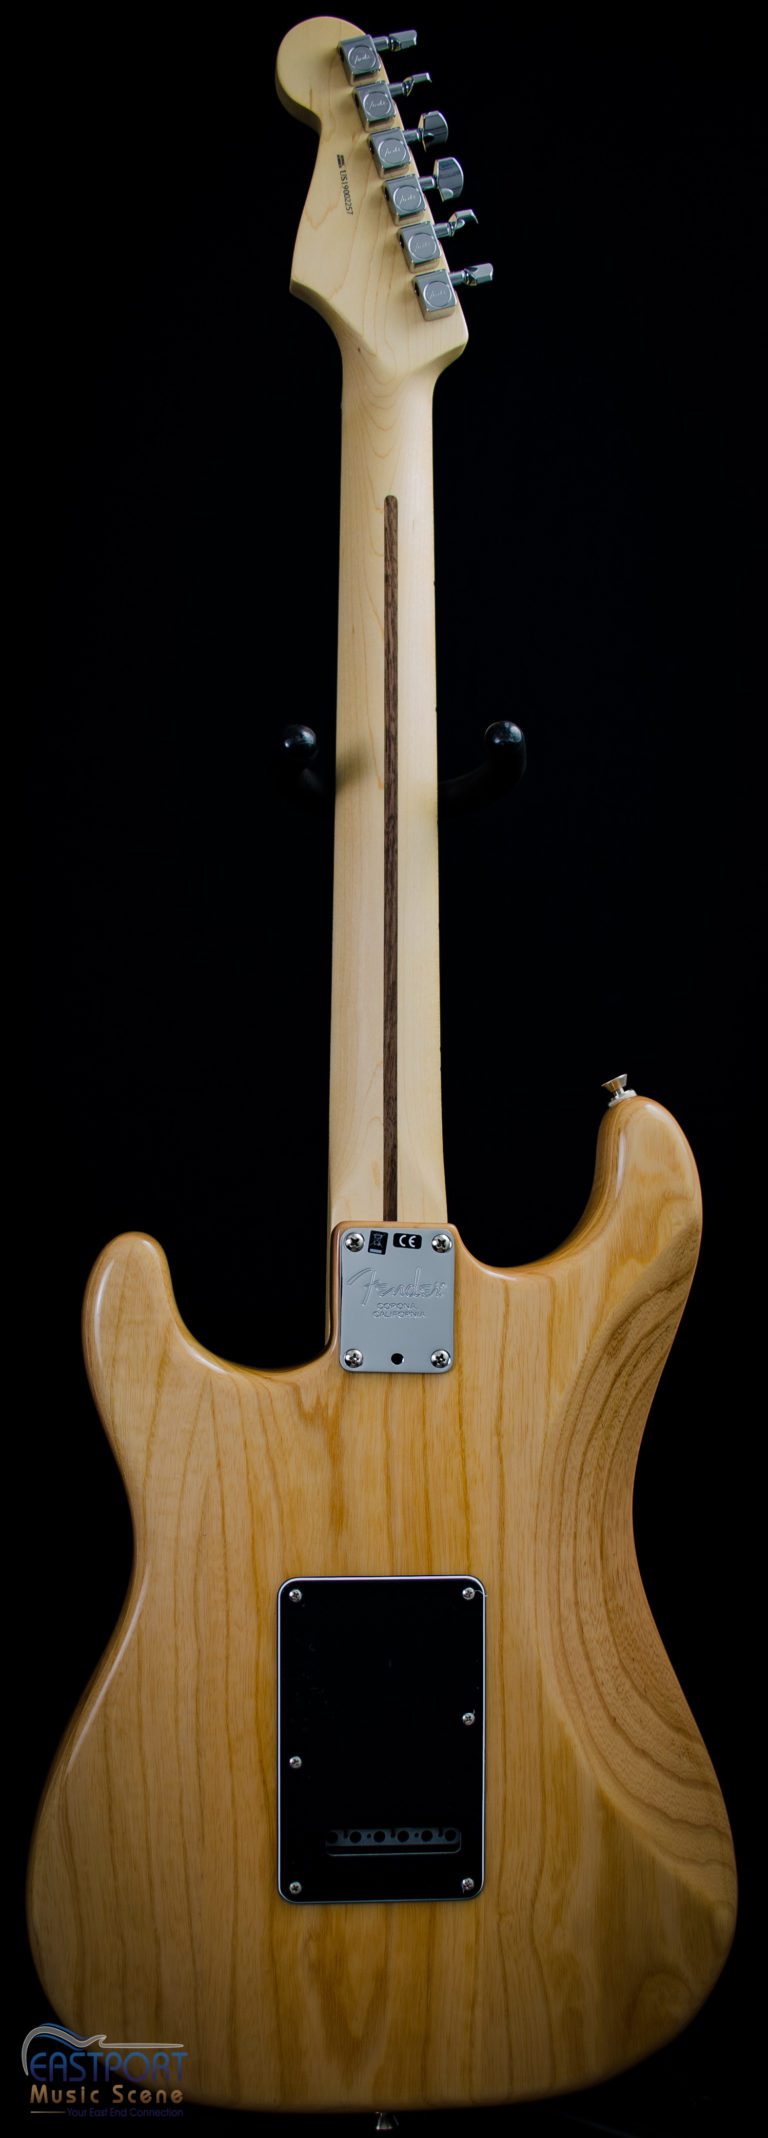 A close up of the back end of an electric guitar